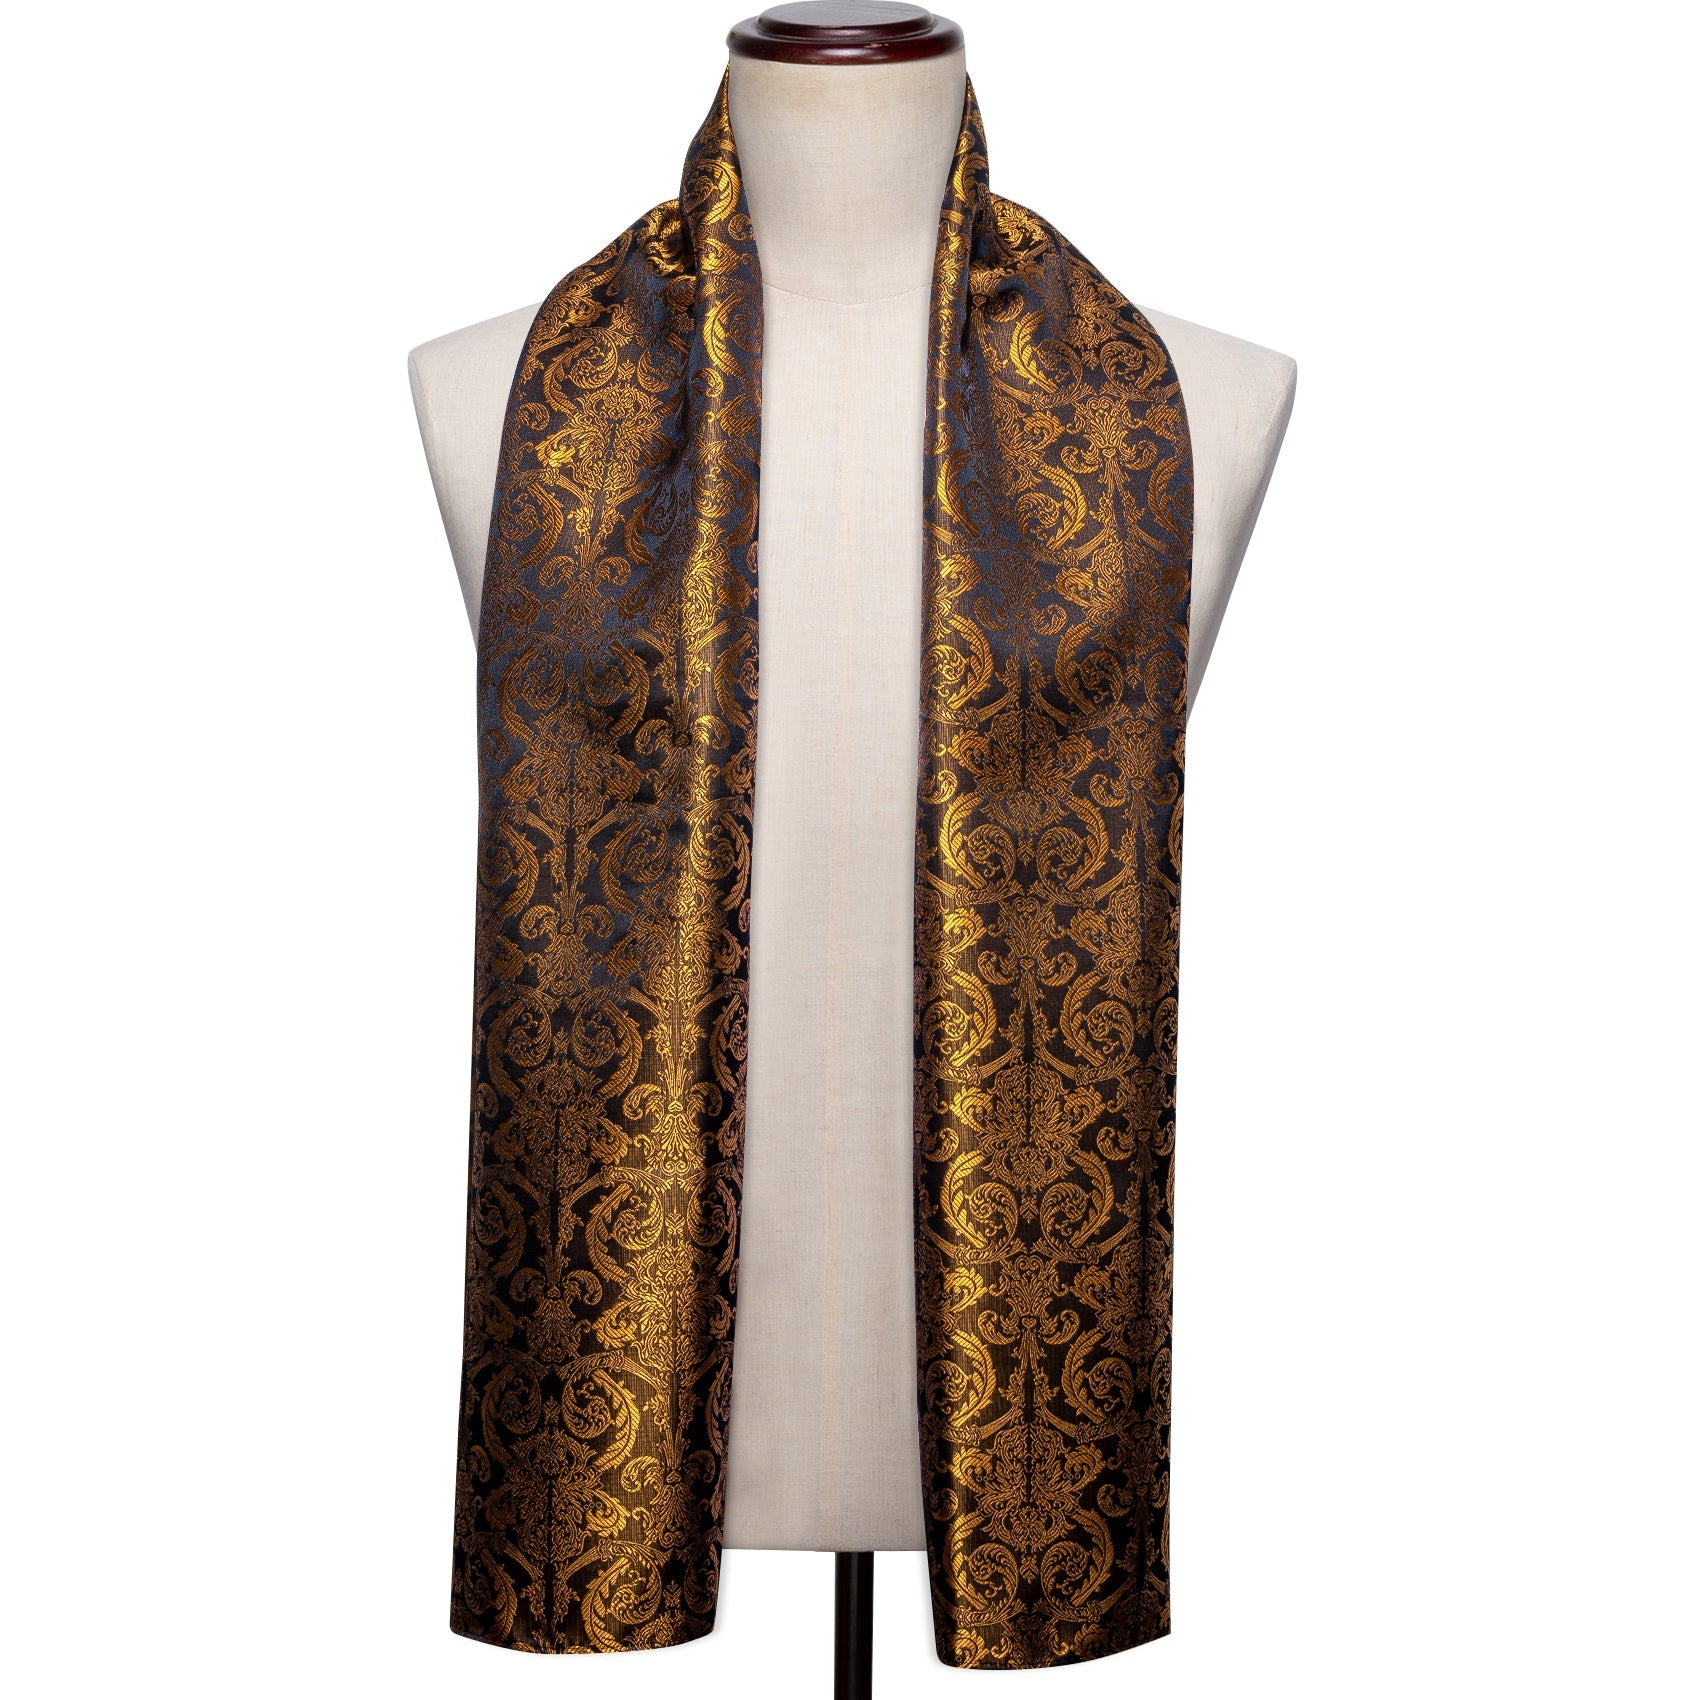 Luxury Black Gold Paisley Scarf with Tie